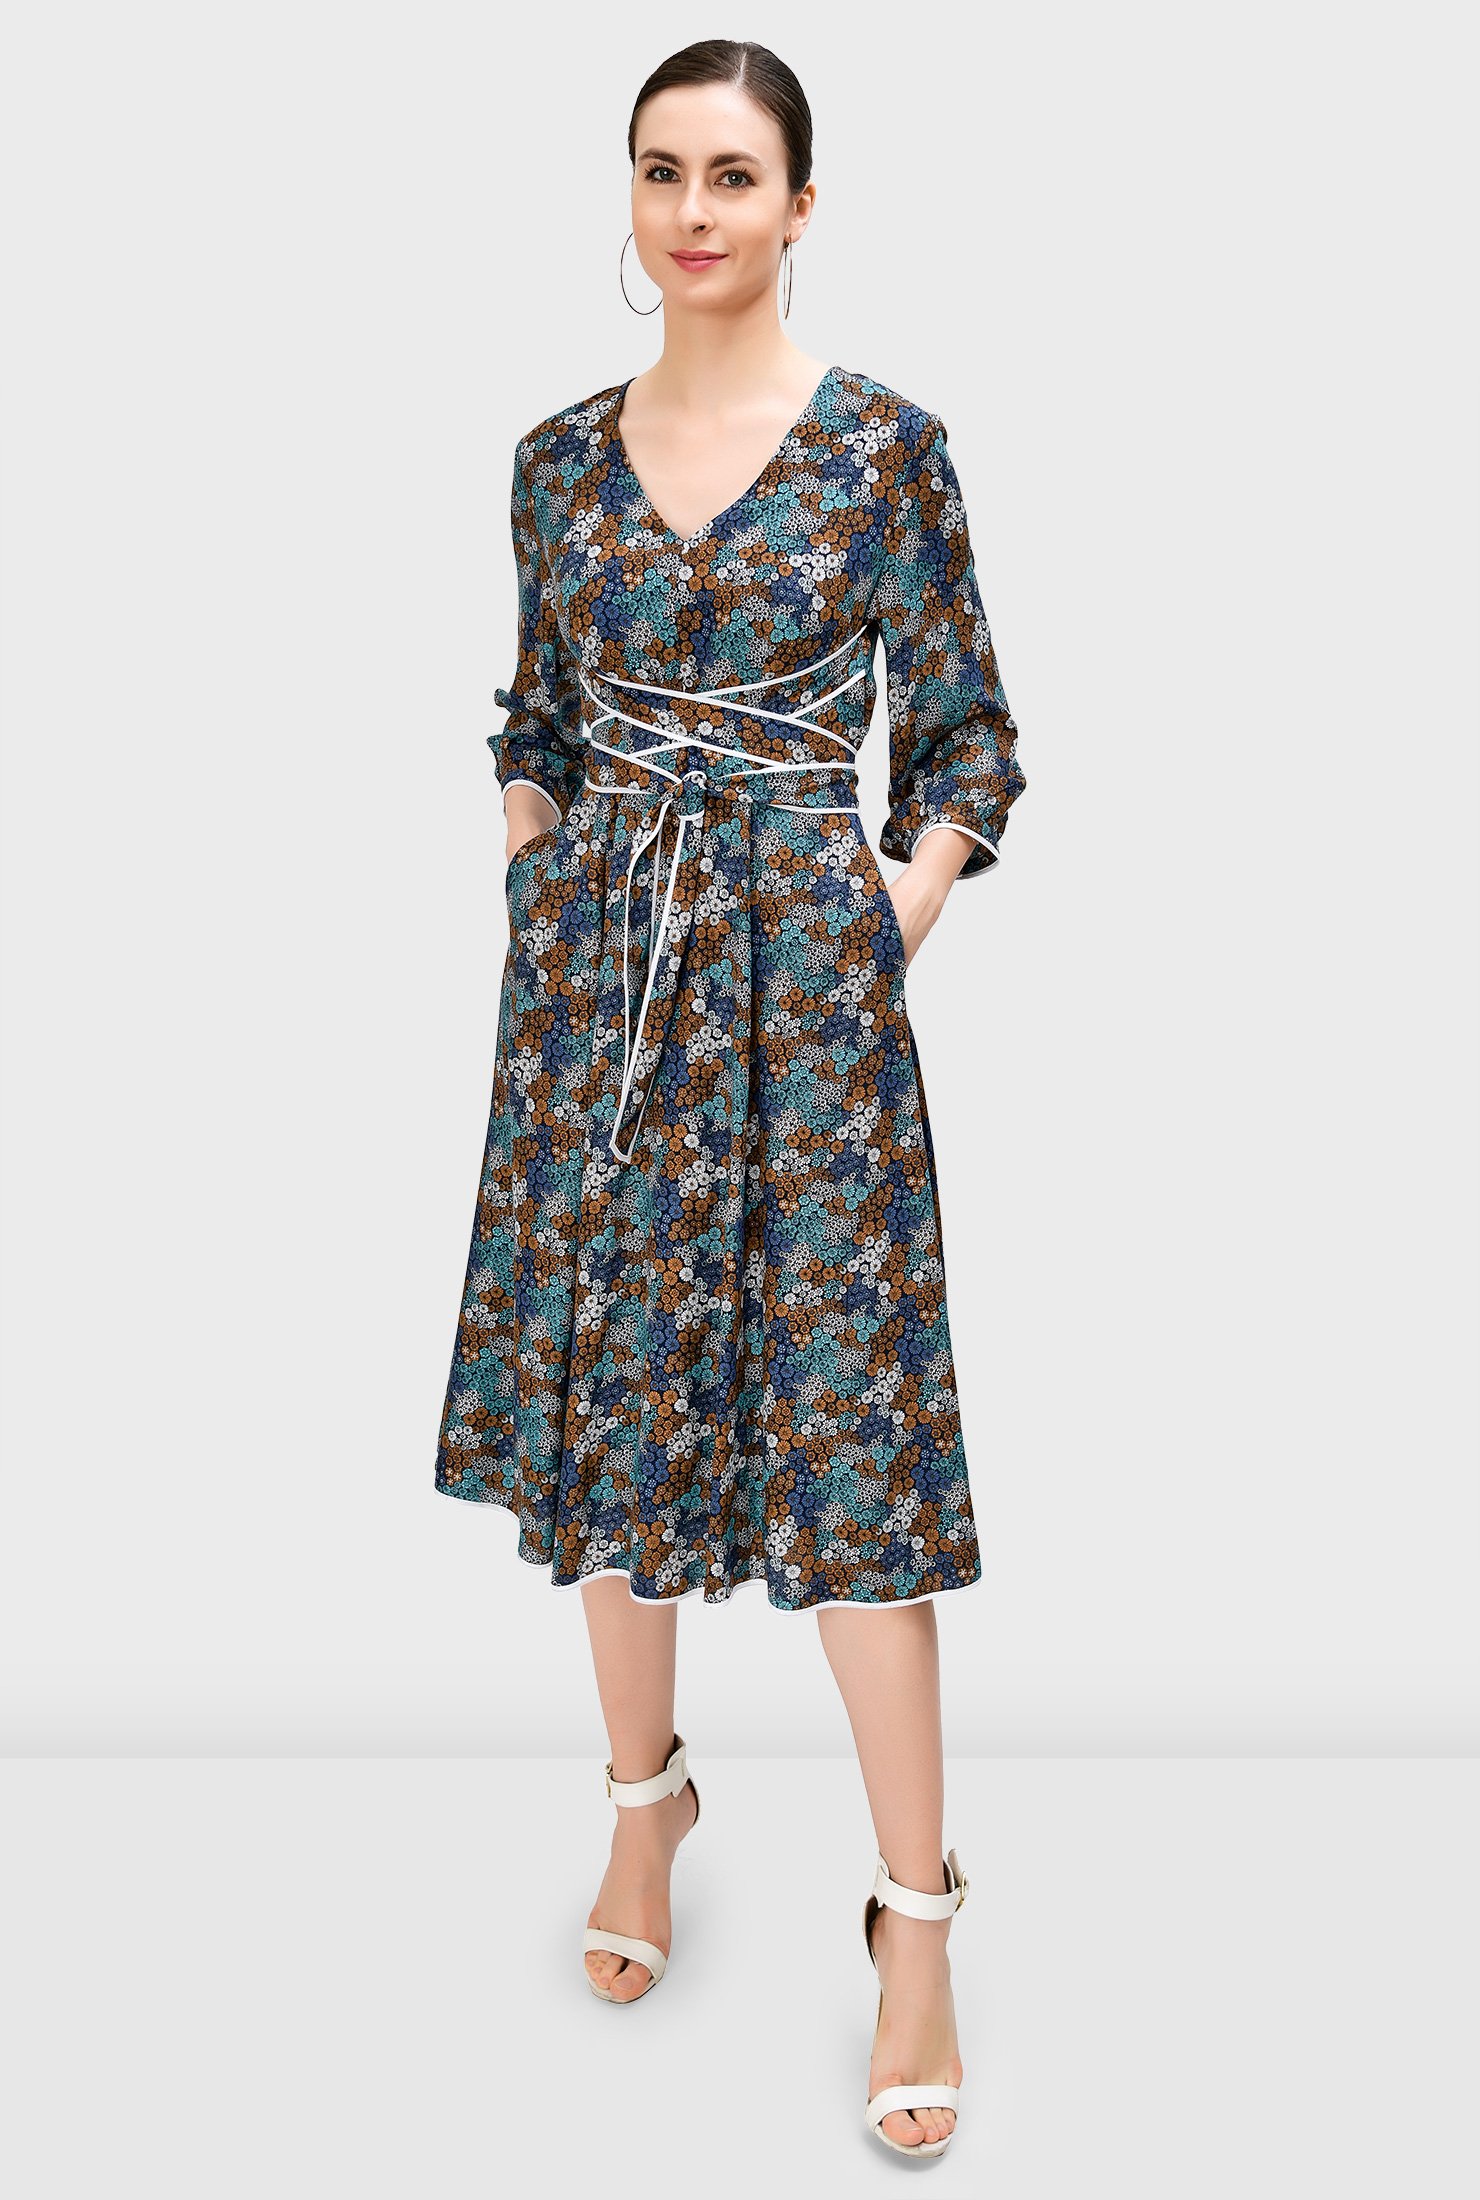 Our floral print dress is styled with attached sash ties with contrast tipped trim that wrap around the waist for a flattering finish.